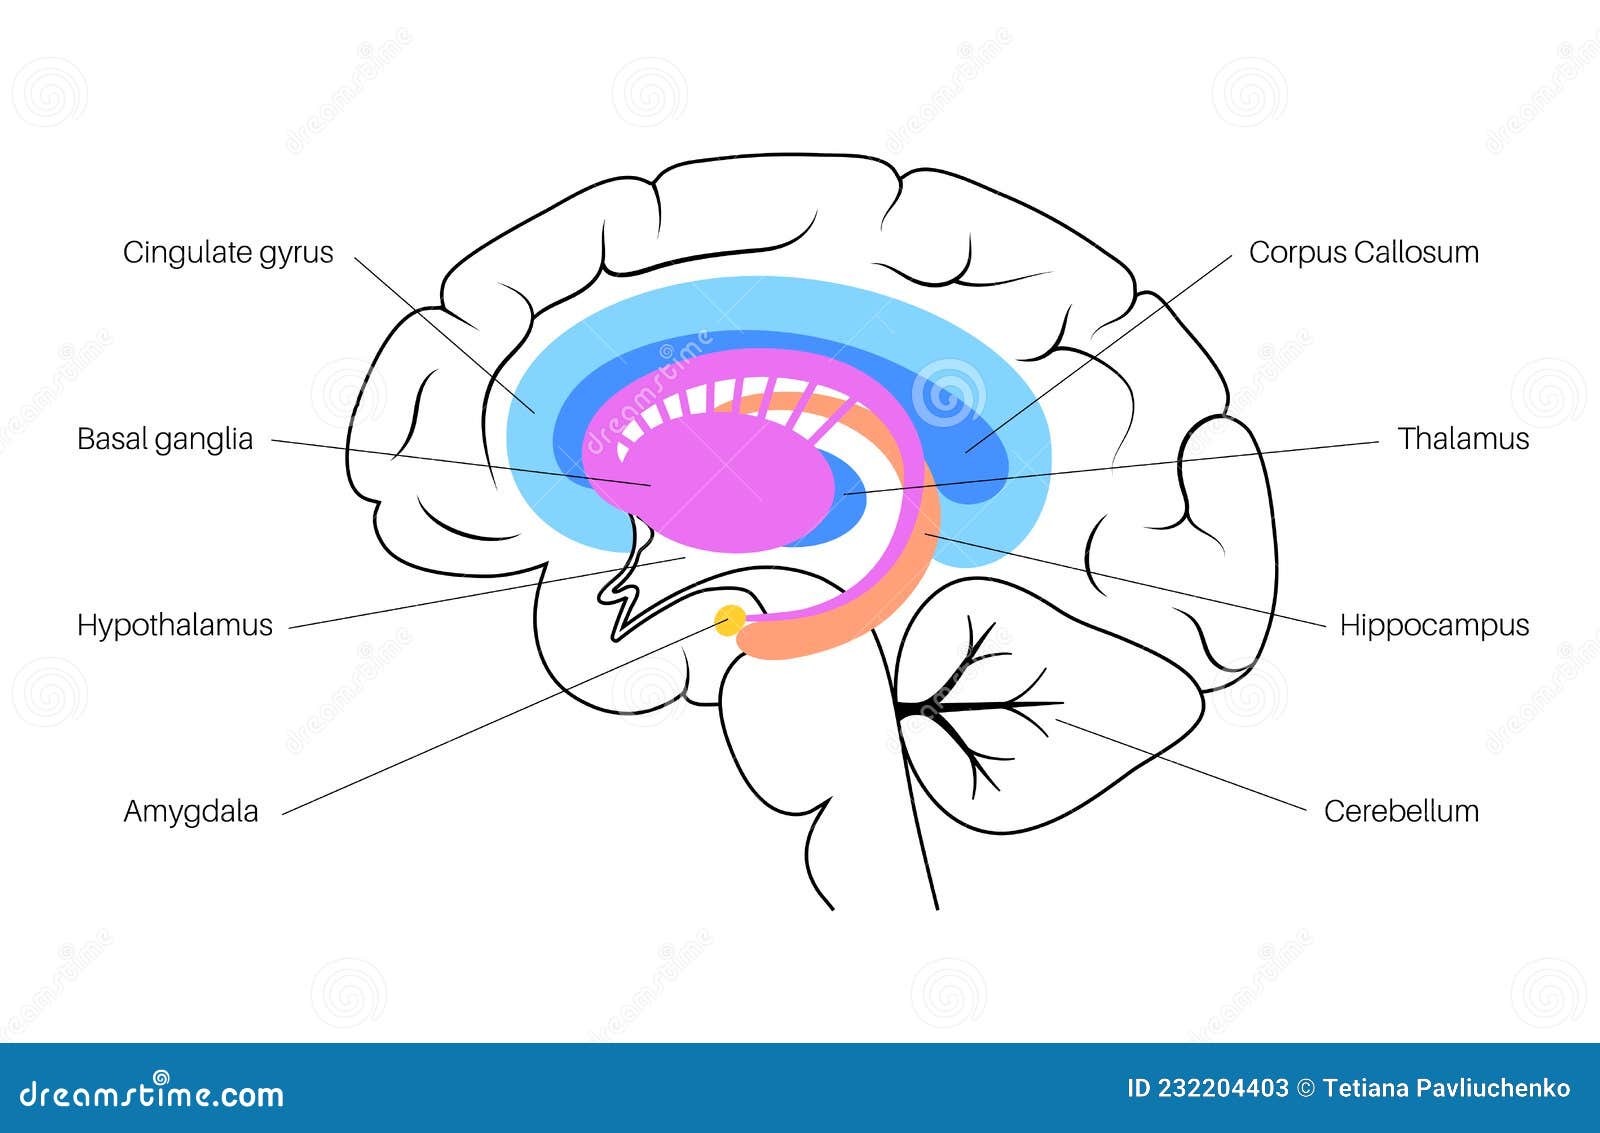 Basal Ganglia And Limbic System